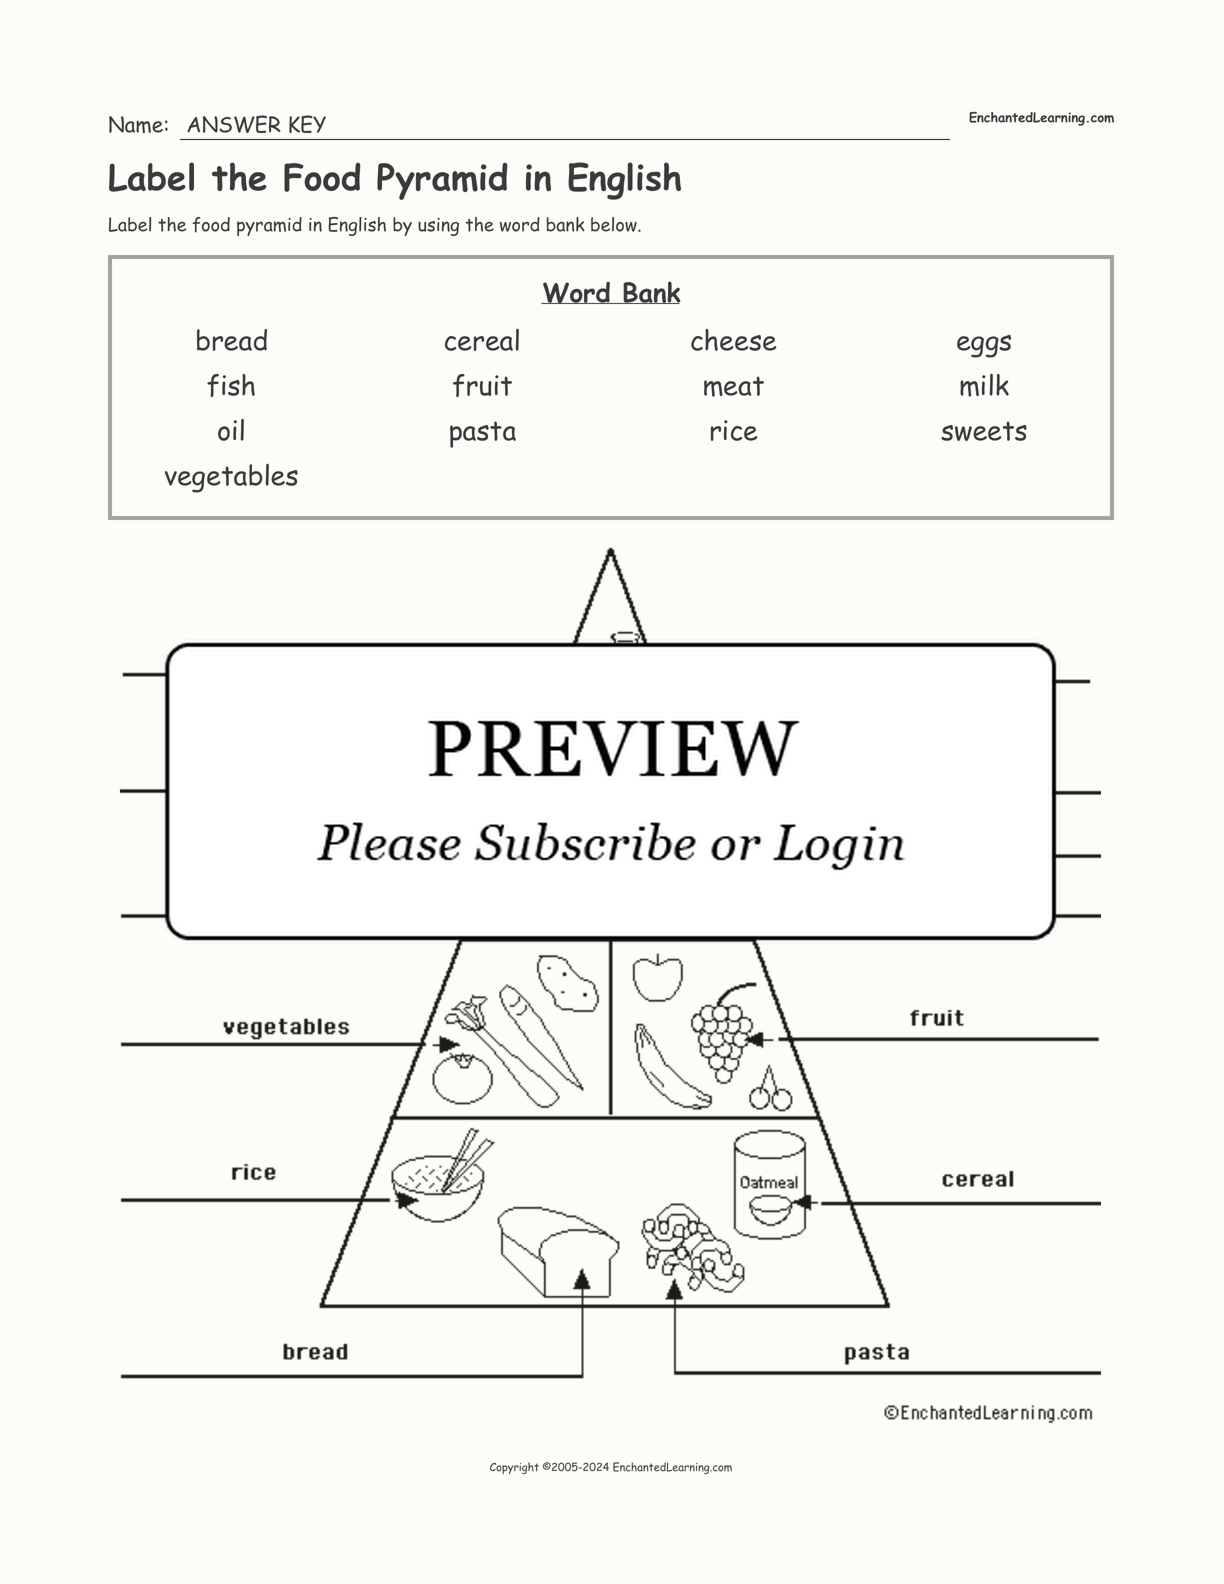 Label the Food Pyramid in English interactive worksheet page 2